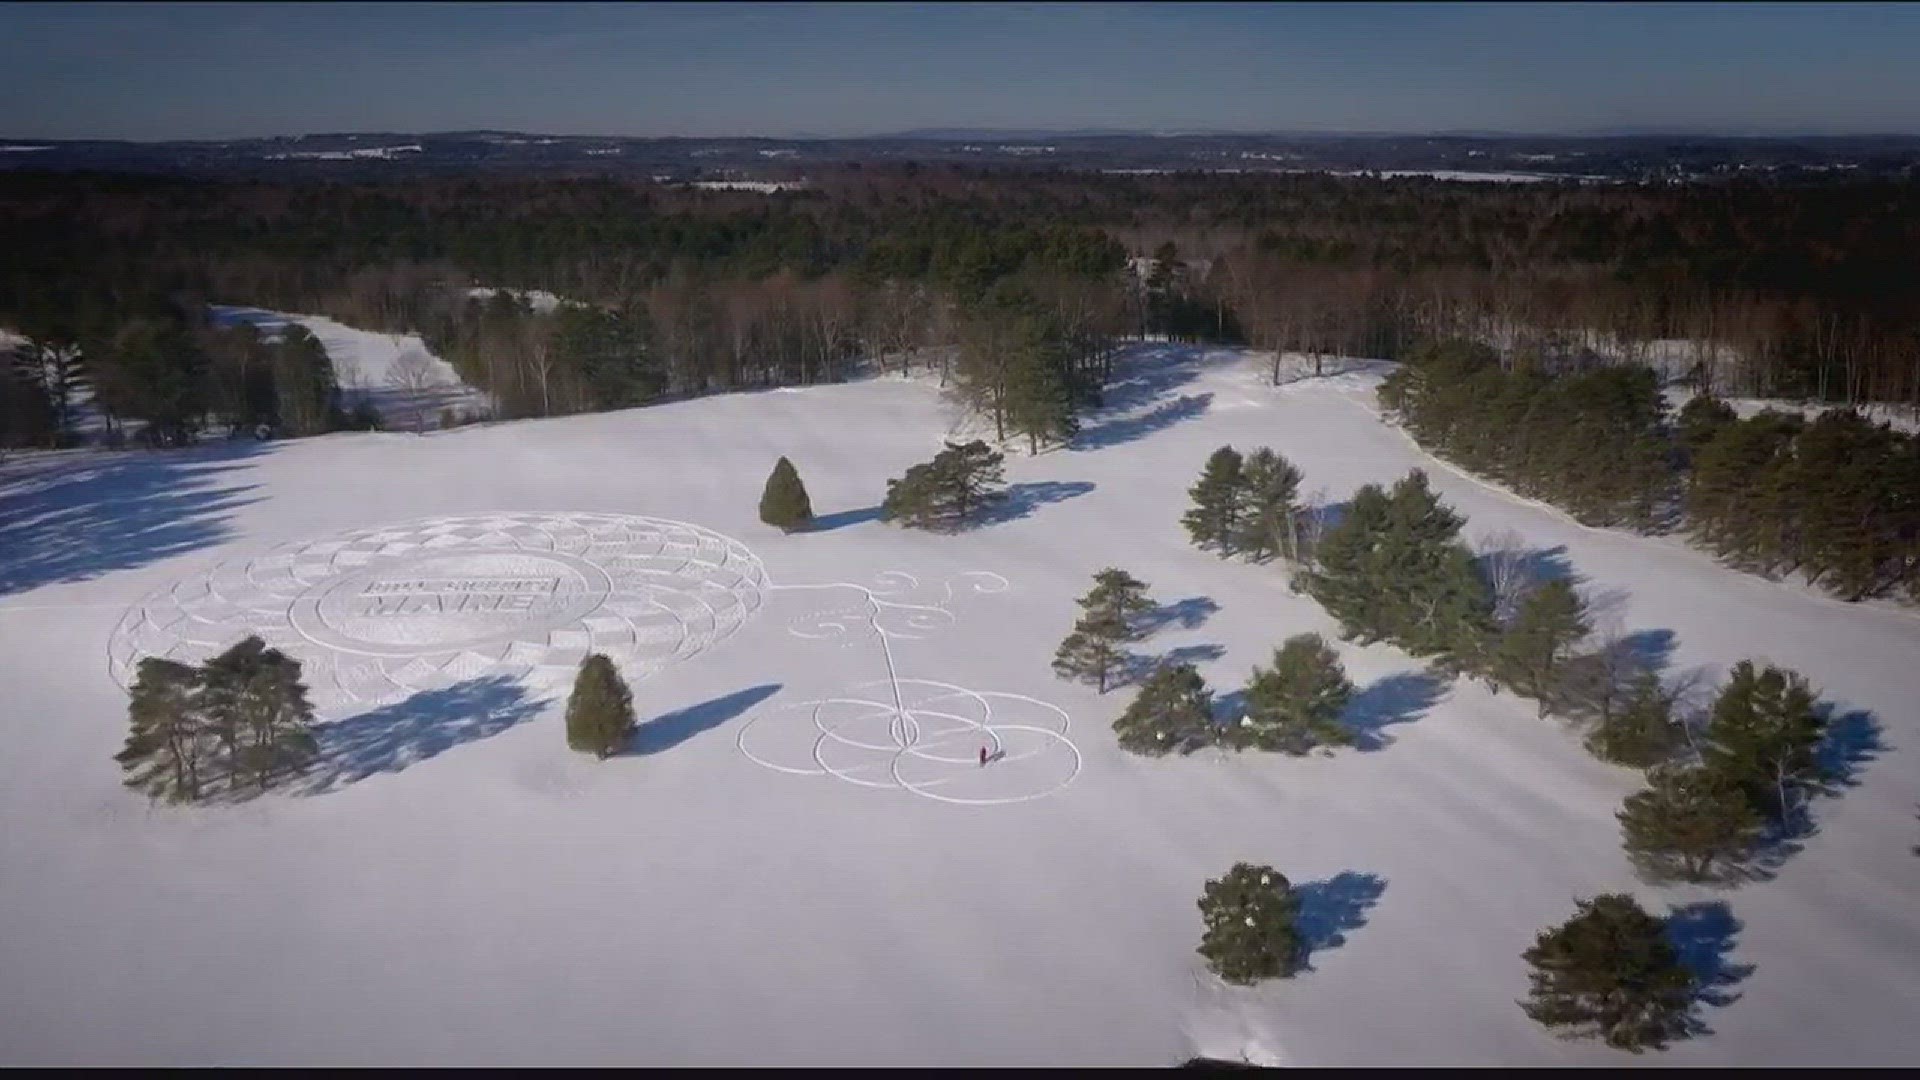 If you've been in and around Augusta, you've seen some amazing snow displays